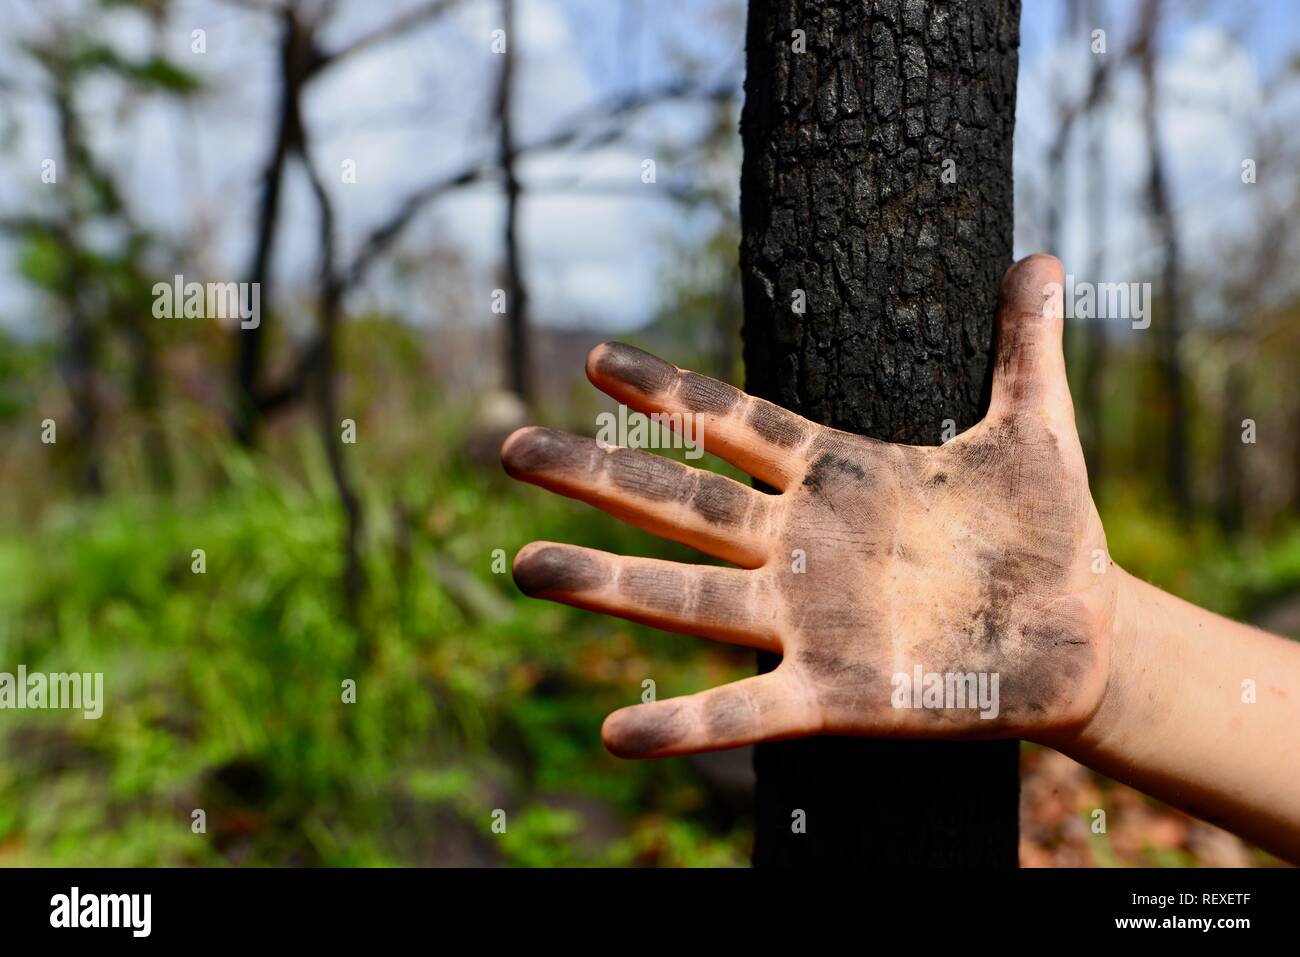 A child's hand covered in ash after touching a tree trunk after a forest fire, Mia Mia State Forest, Queensland, Australia Stock Photo